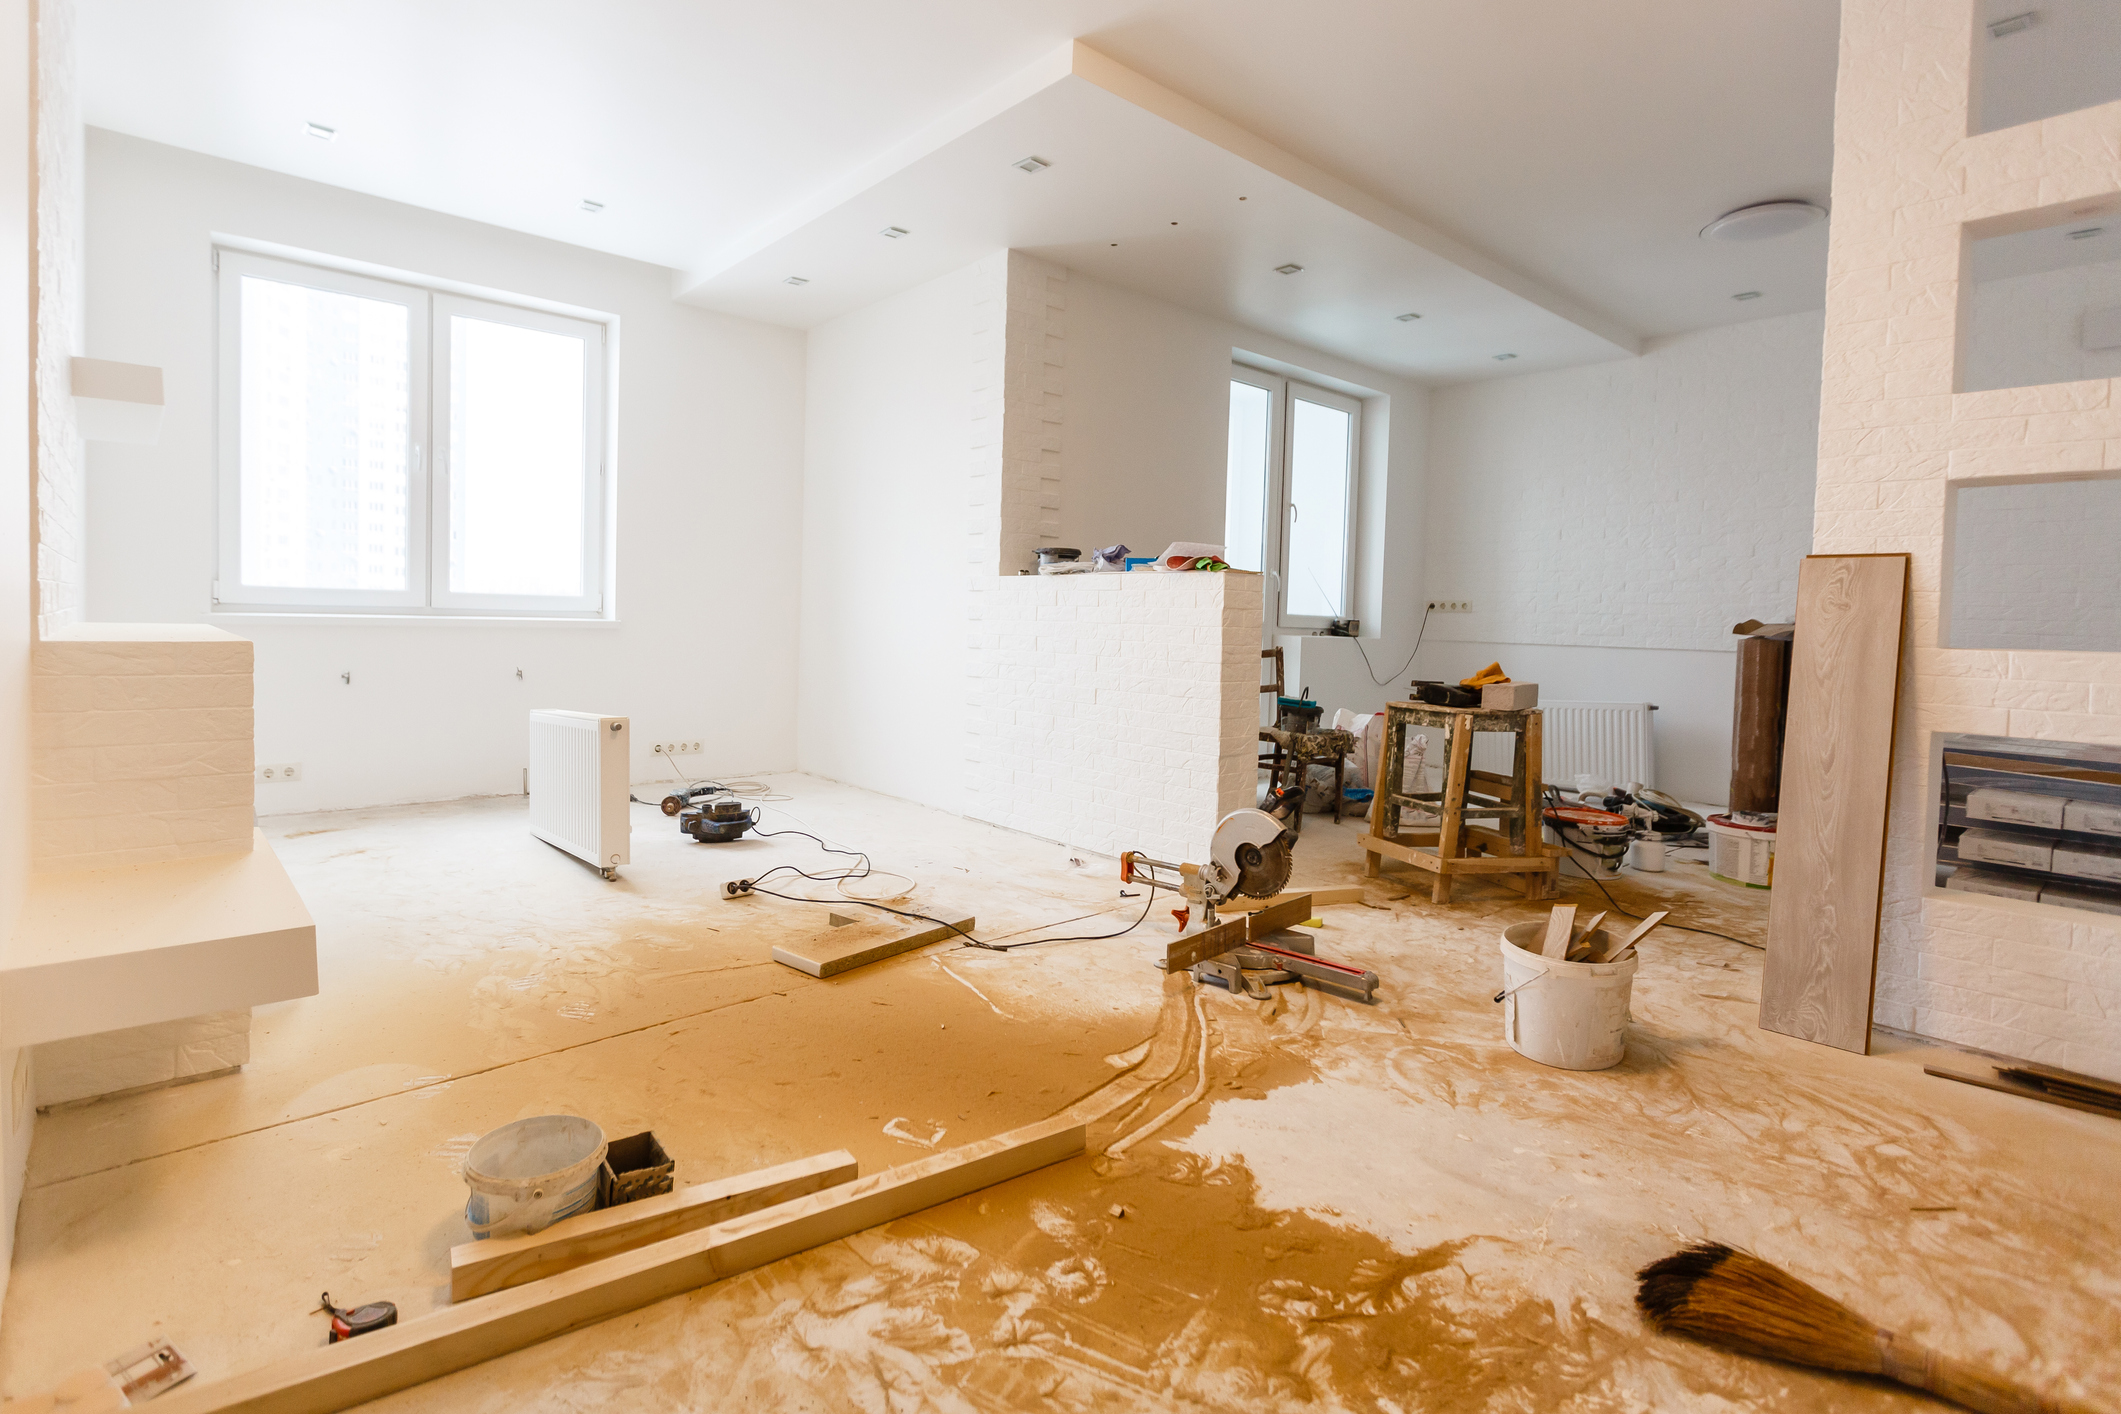 cost of gut renovation with no kitchen or bath